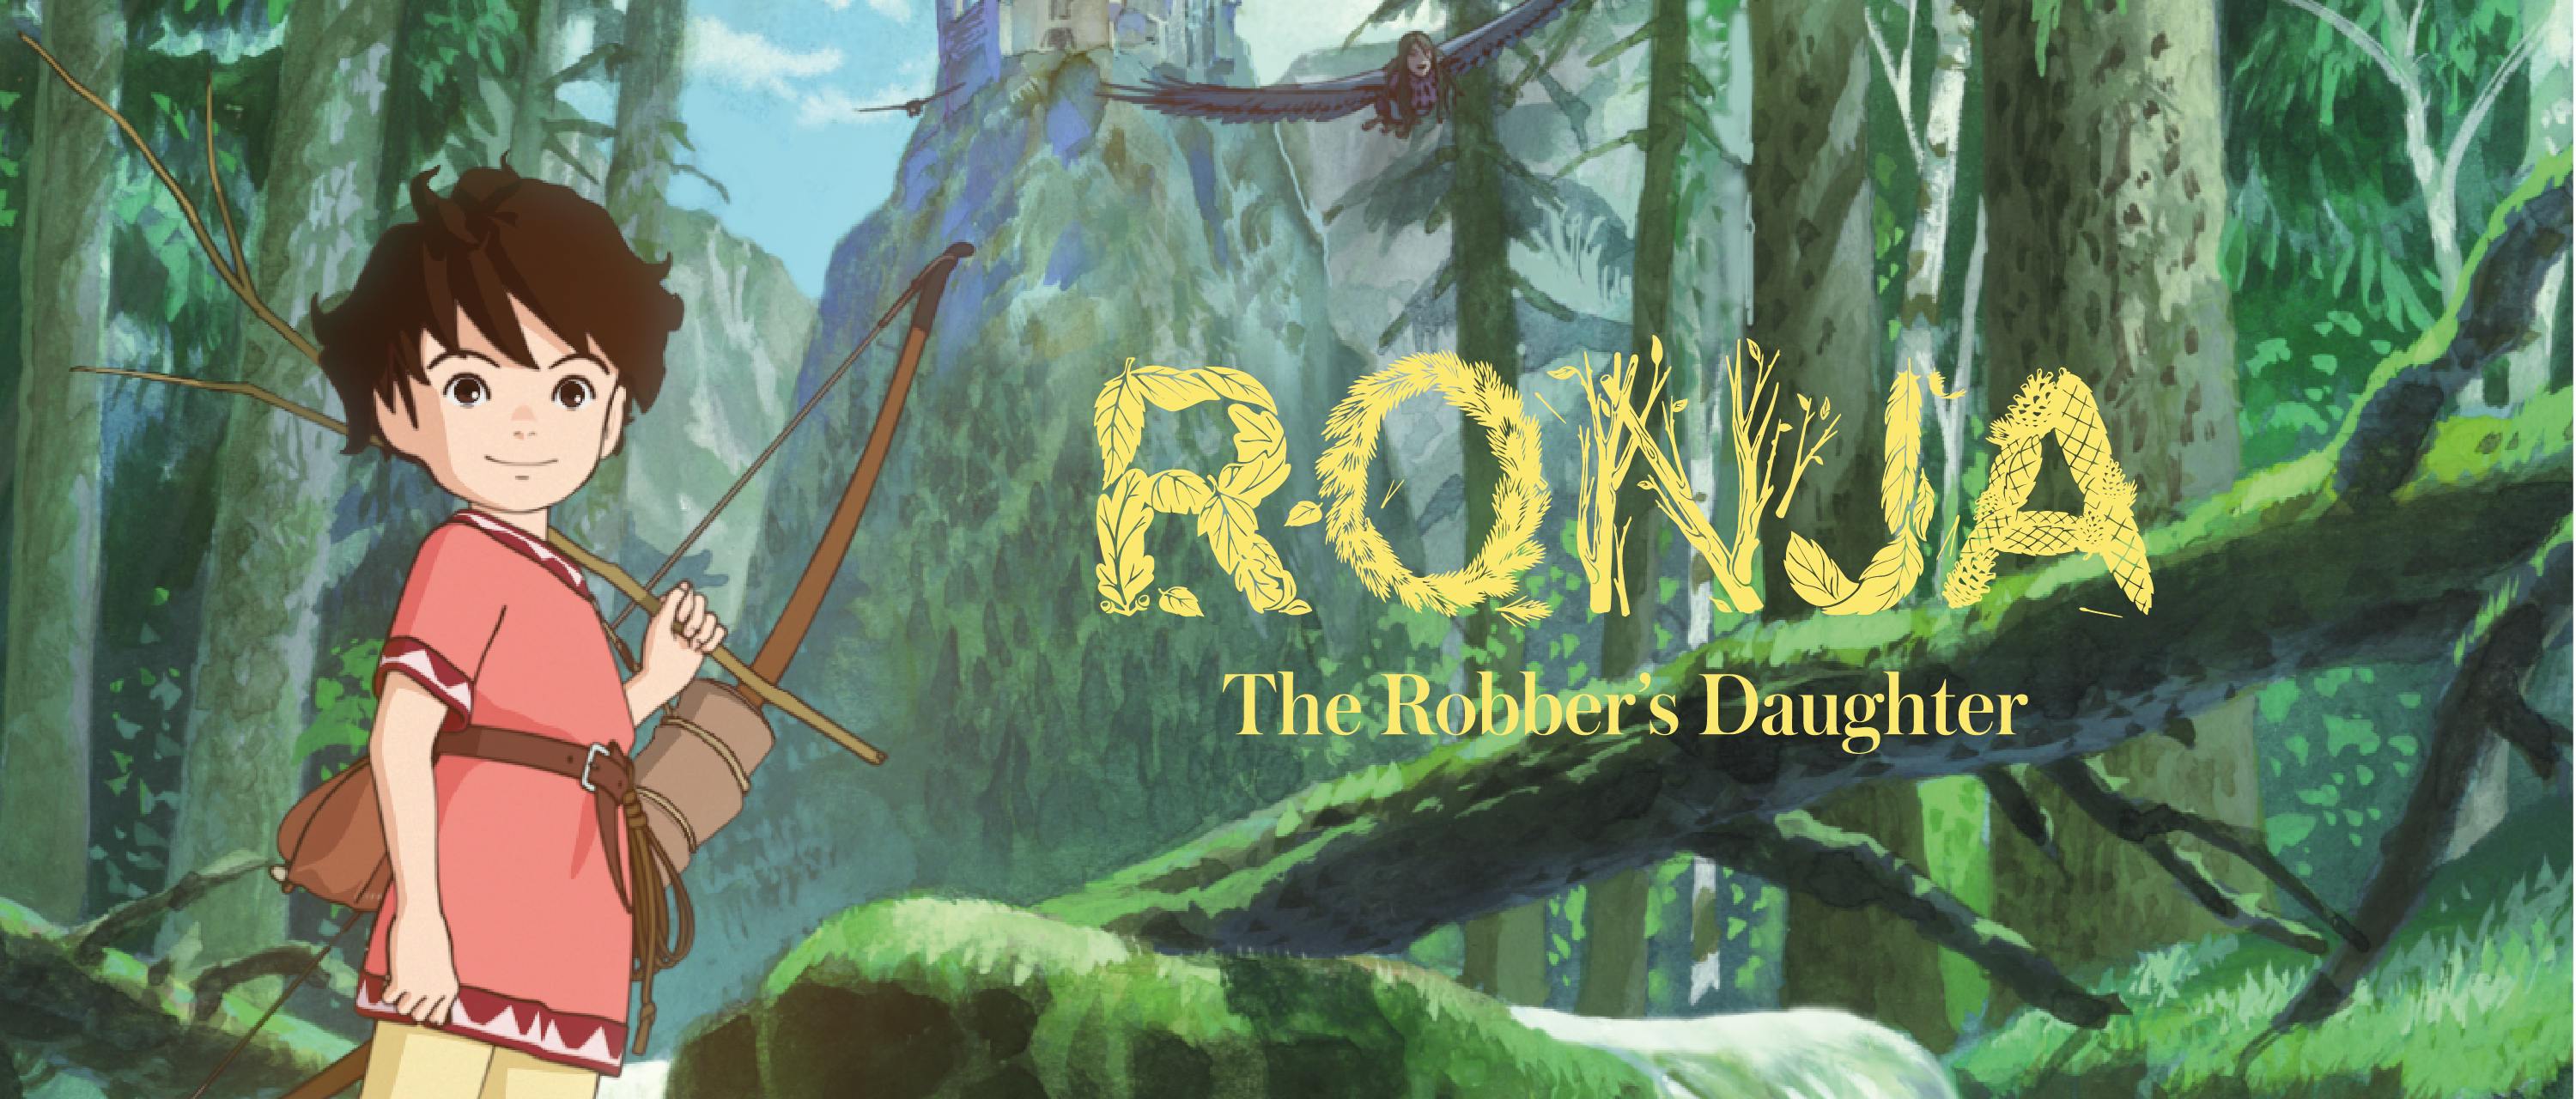 Image of Ronja and logotype